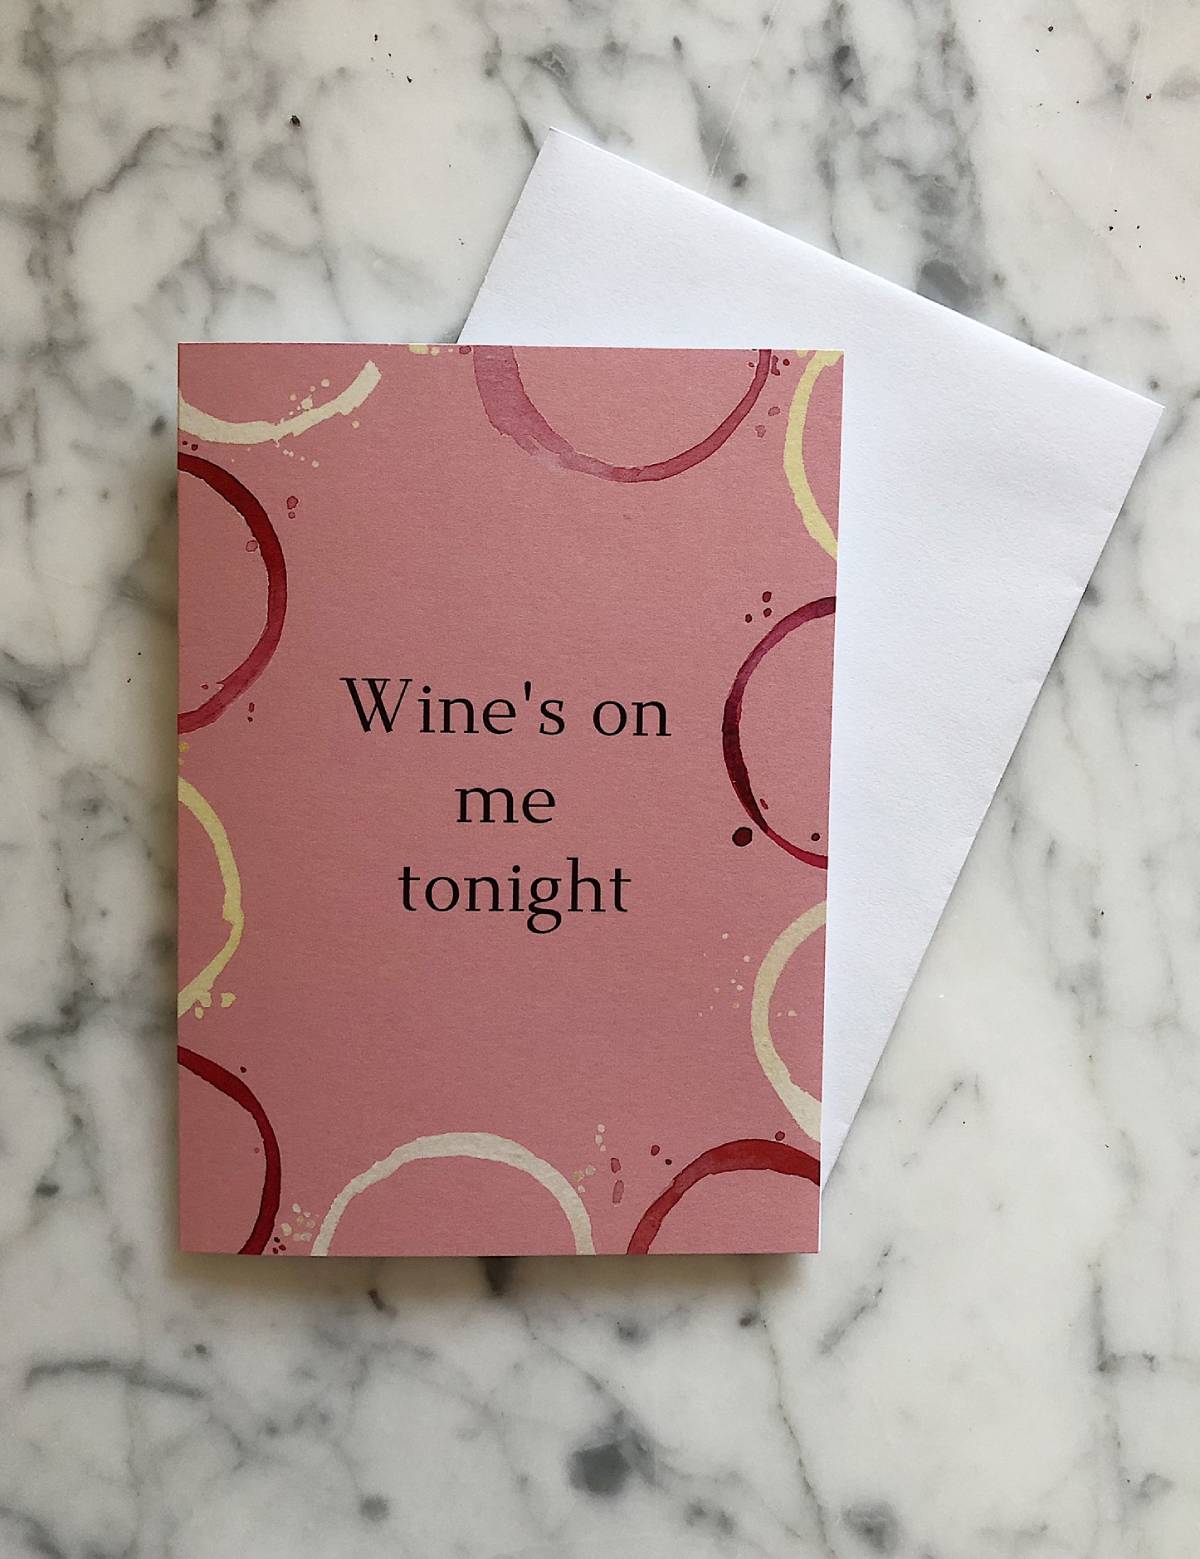 A pink card with an outline of various colored wine stains and the text "Wine's on me tonight"